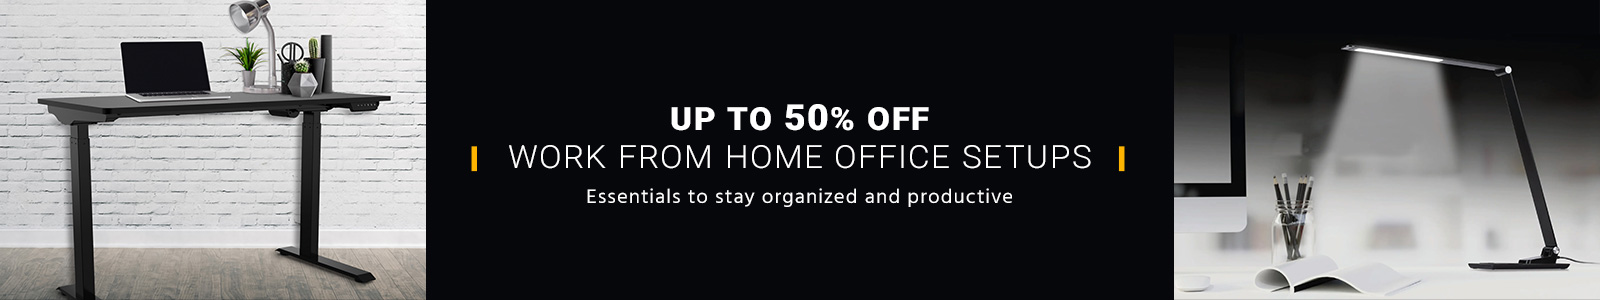 Up to 50% off 
Work From Home Office Setup
Choose from Good, Better & Best
Essentials to stay organized and productive
Shop Now